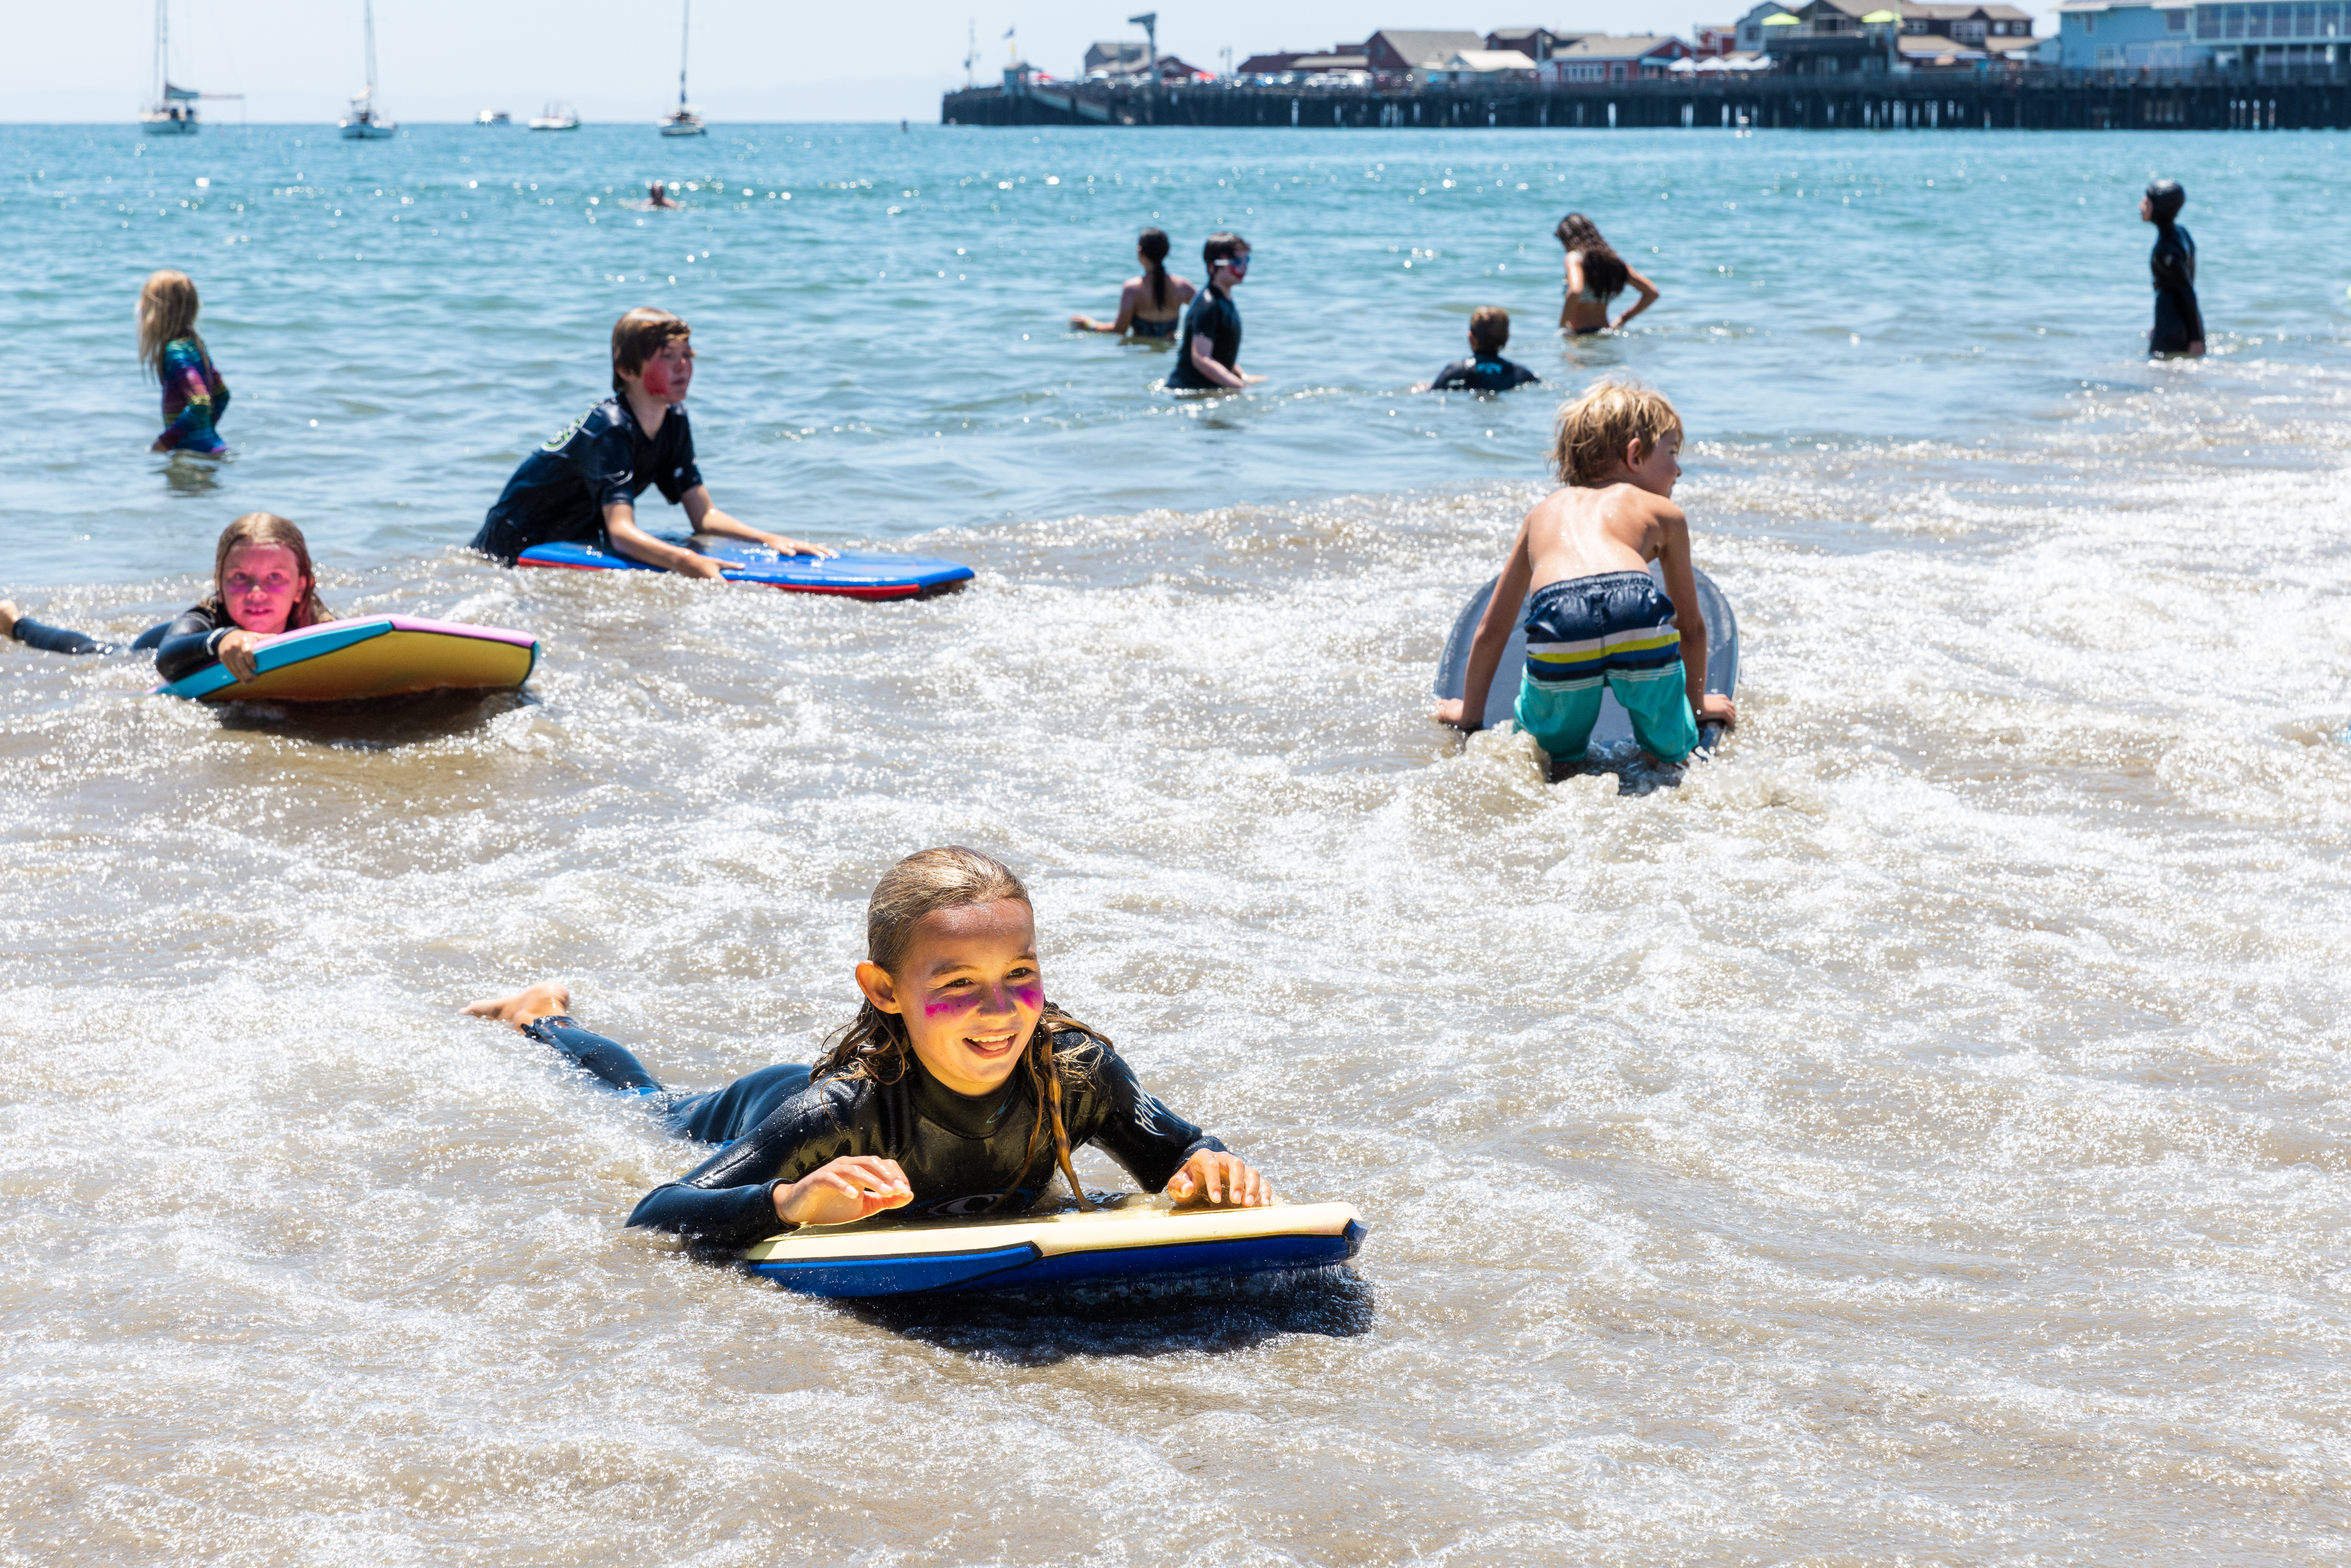 Campers boogie board along the shore